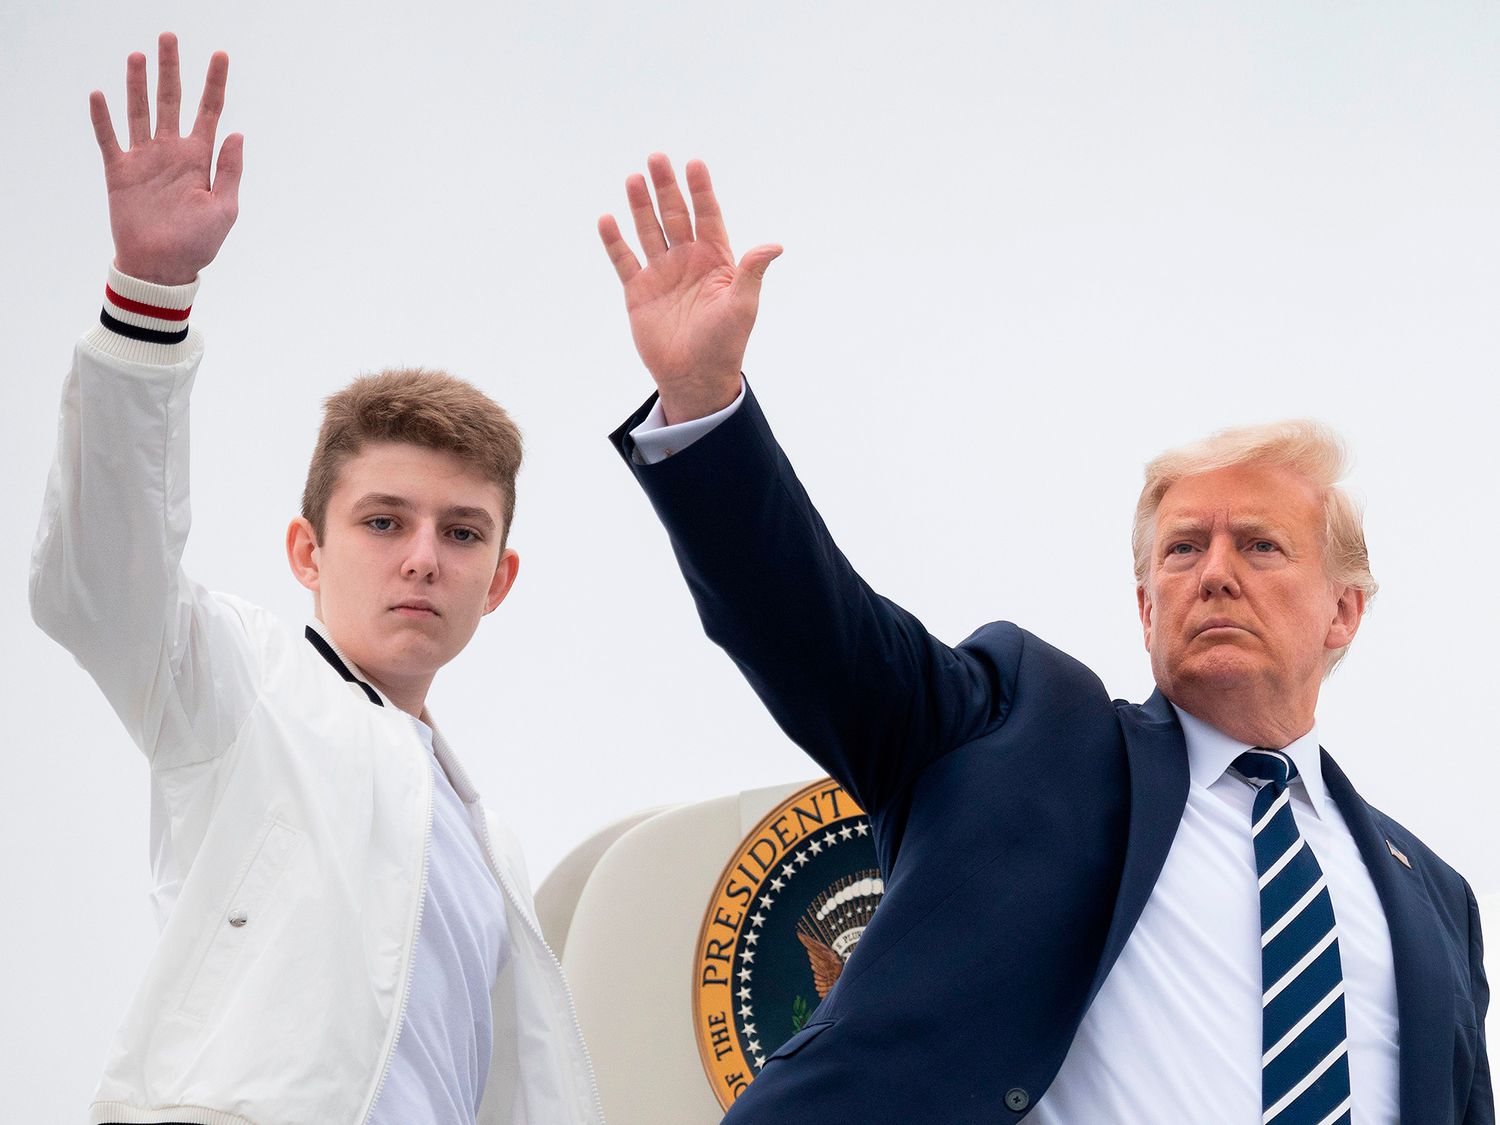 US President Donald Trump and his son Barron wave as they board Air Force One